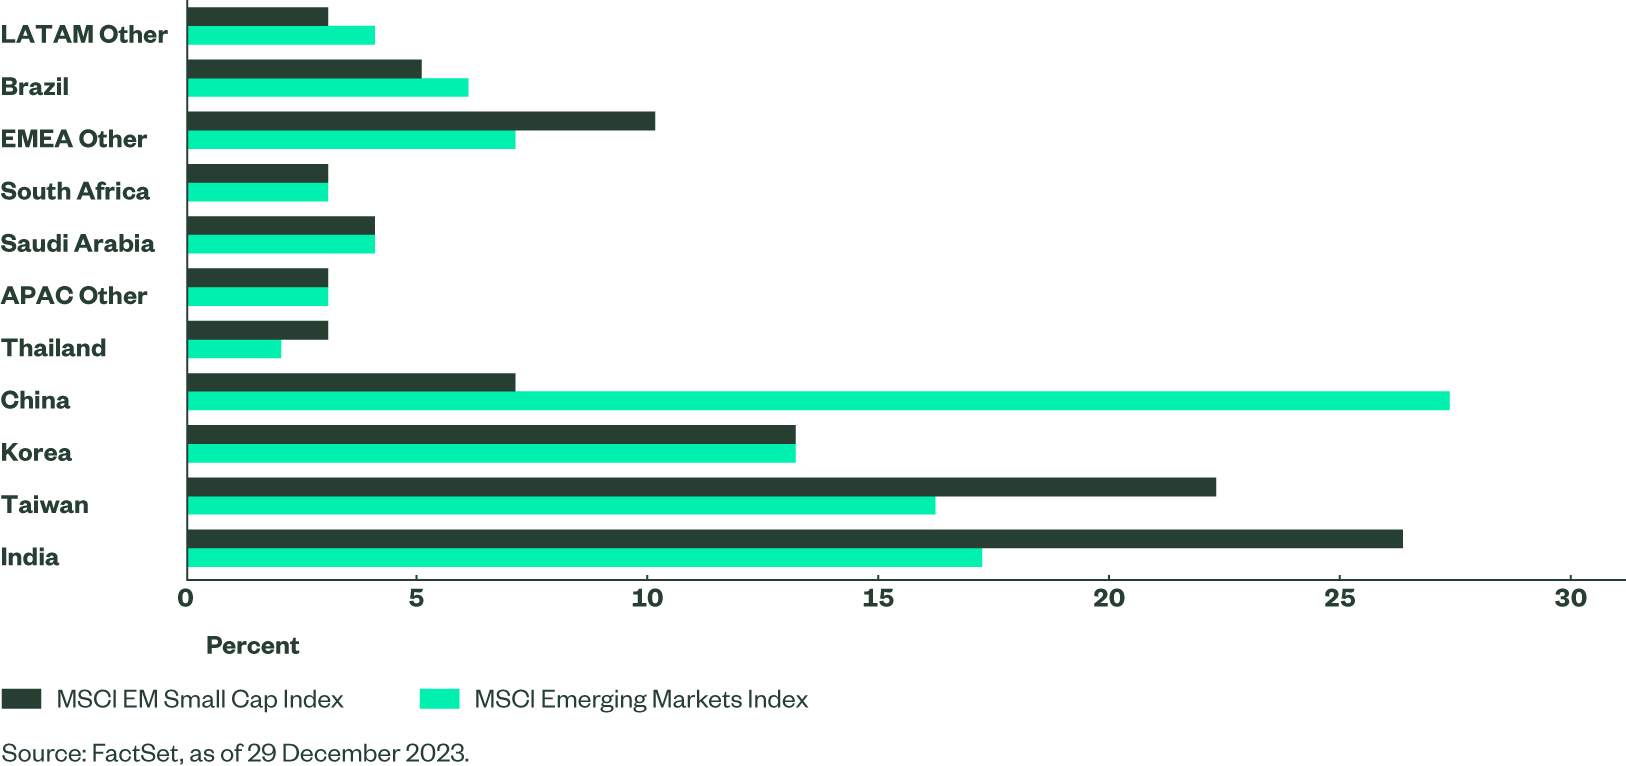 A bar chart detailing the country breakdown for both the MSCI Emerging Markets Index and the MSCI EM Small Cap Index